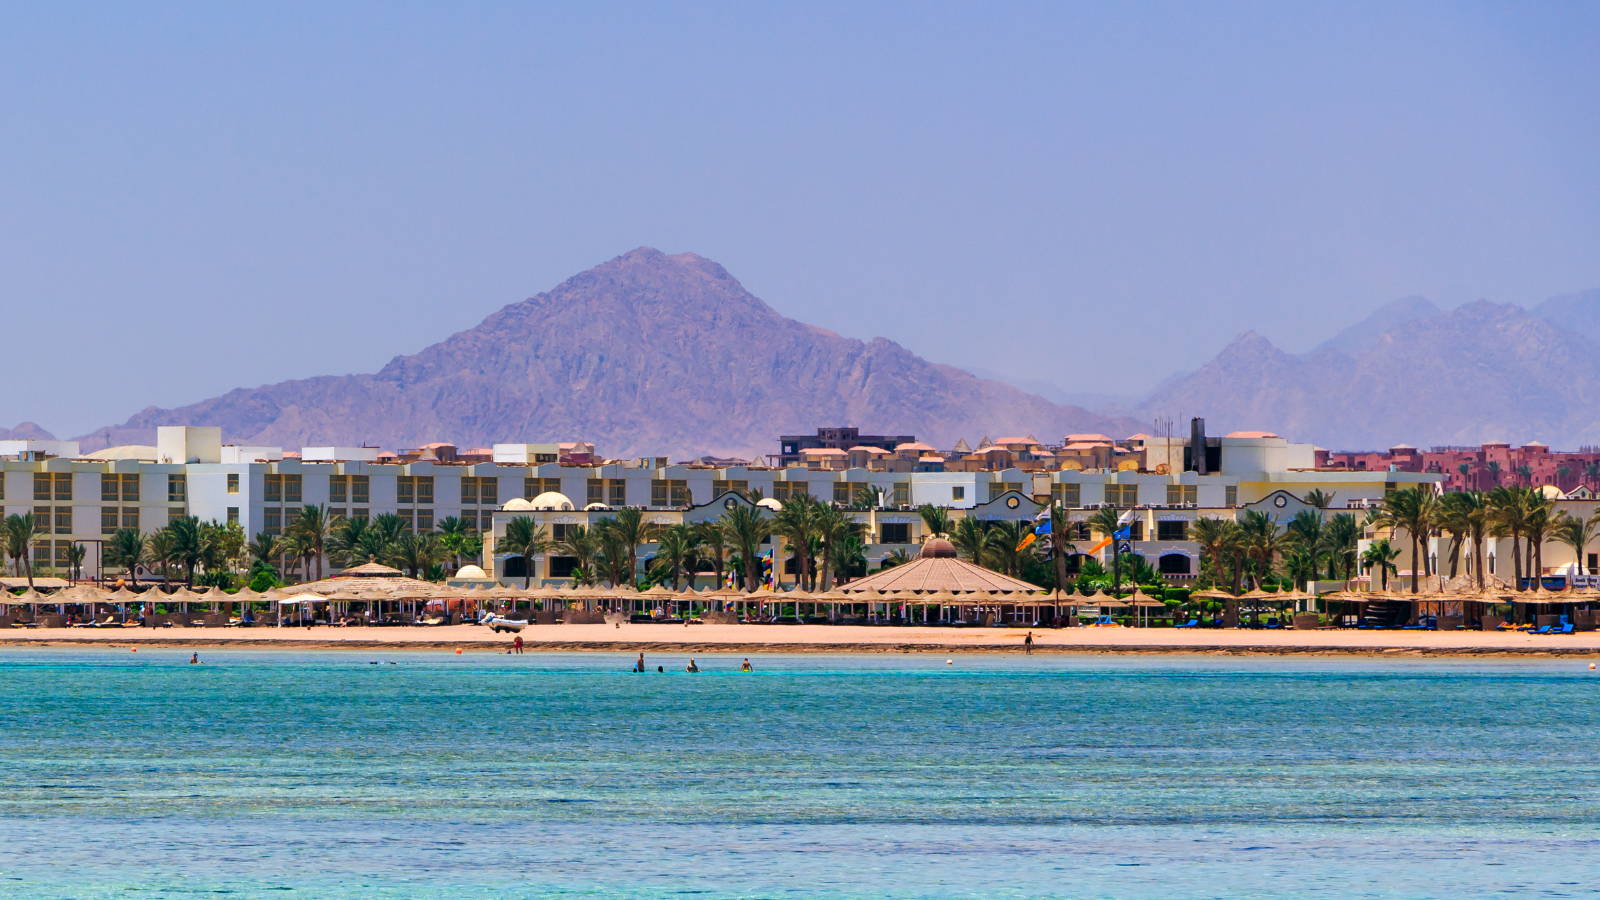 Photo of a resort on a beach in Egypt for COP27 article